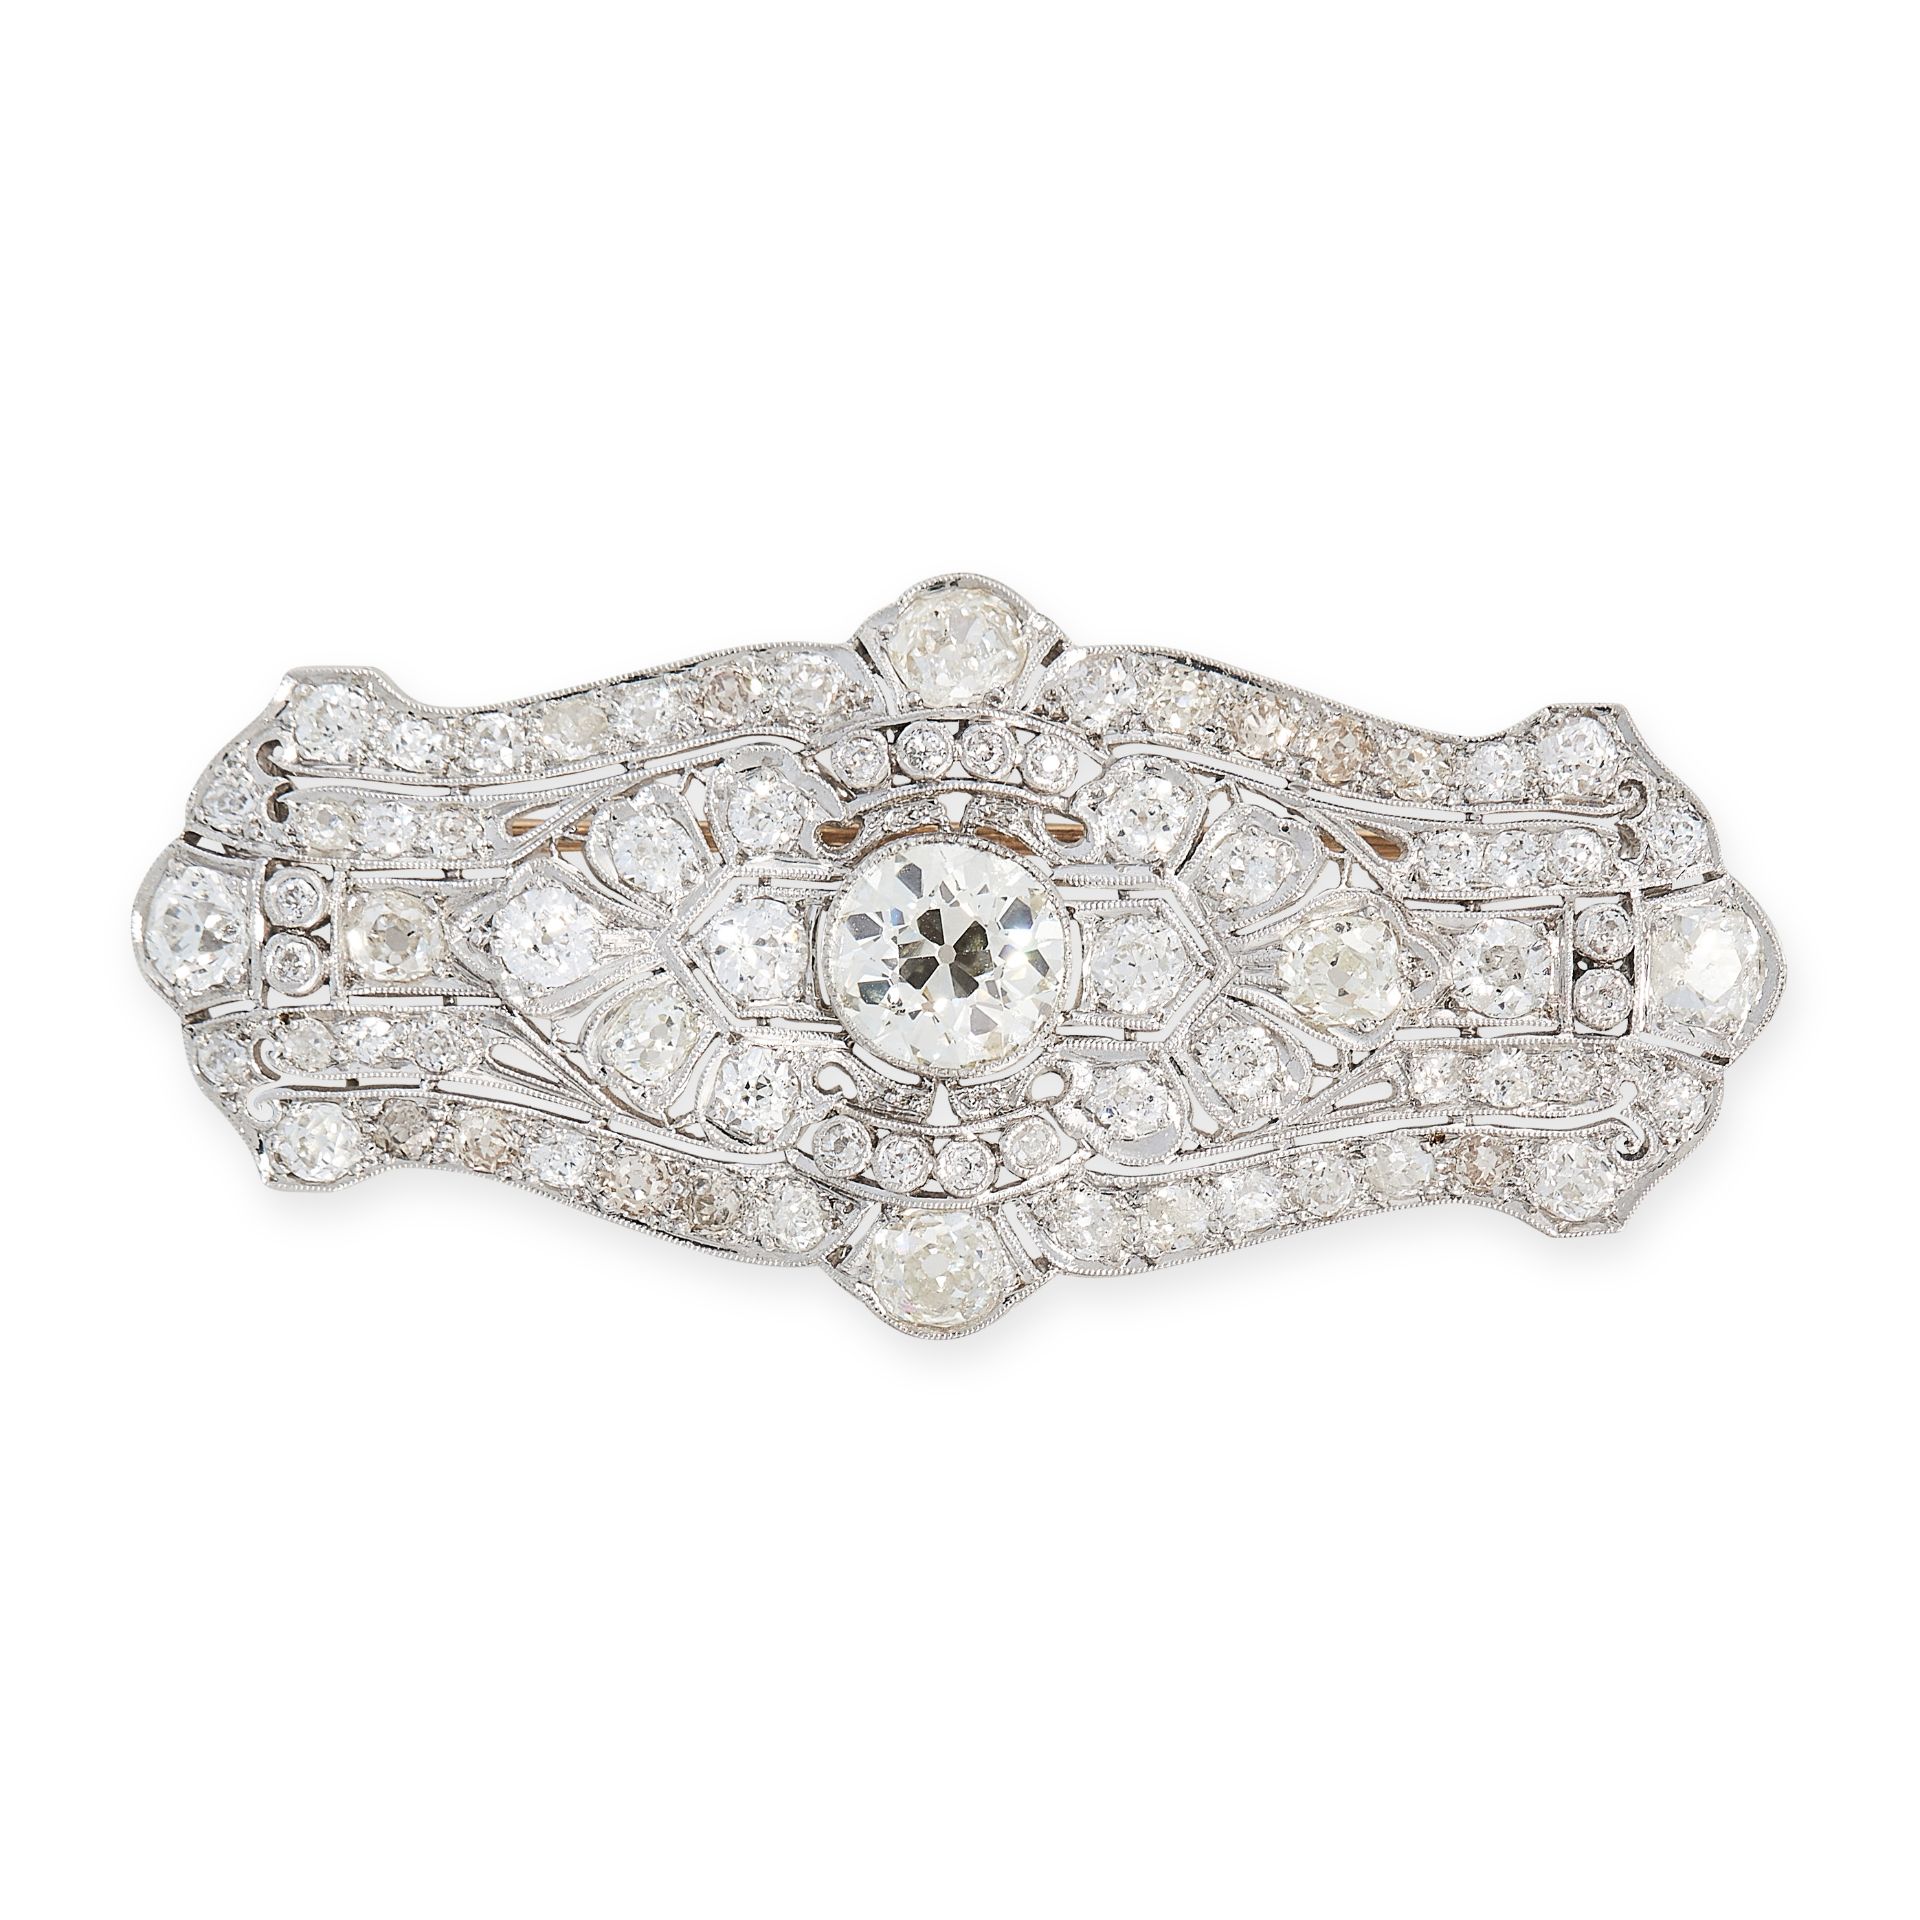 AN ART DECO DIAMOND BROOCH / PENDANT, EARLY 20TH CENTURY in platinum and yellow gold, the stylised